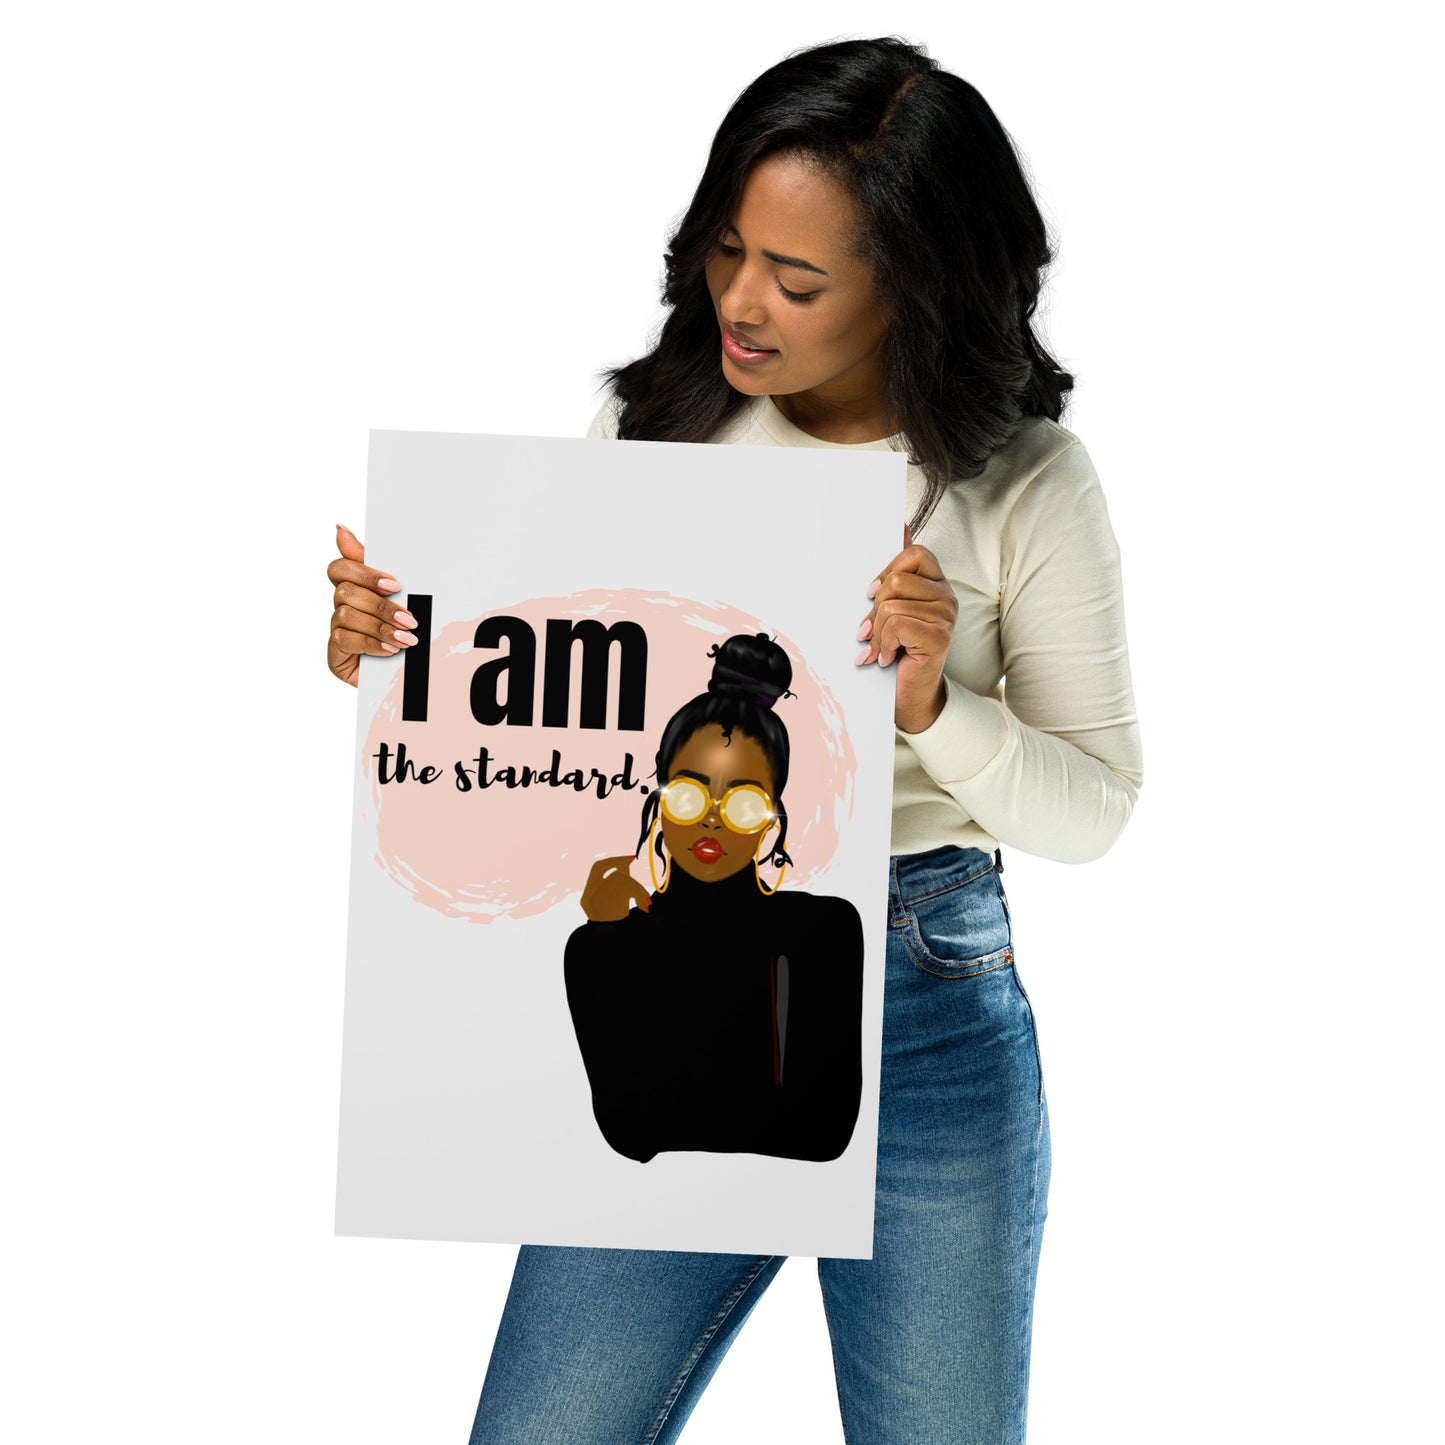 I am the Standard Poster